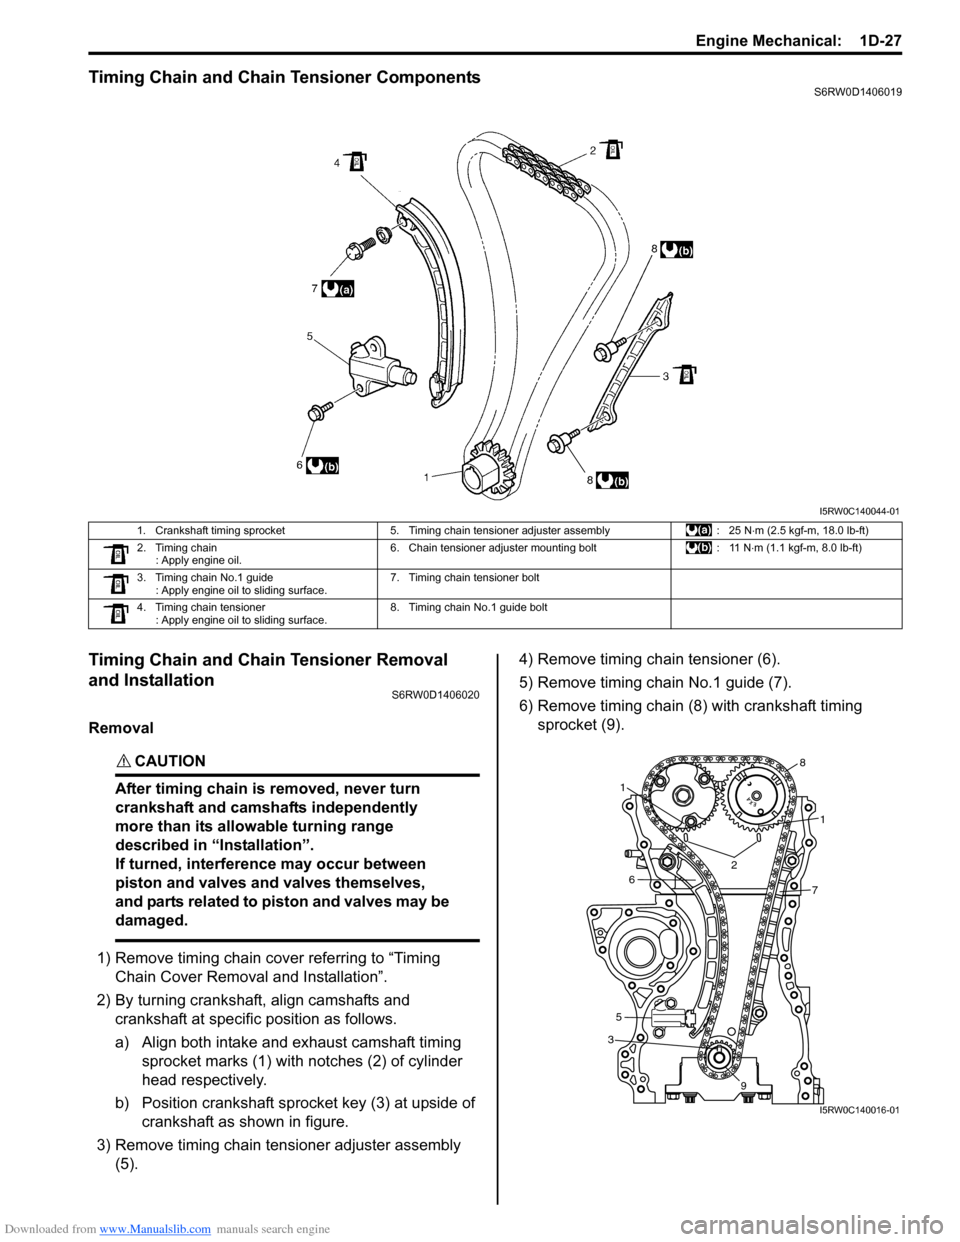 SUZUKI SX4 2006 1.G Service Service Manual Downloaded from www.Manualslib.com manuals search engine Engine Mechanical:  1D-27
Timing Chain and Chain Tensioner ComponentsS6RW0D1406019
Timing Chain and Chain Tensioner Removal 
and Installation
S